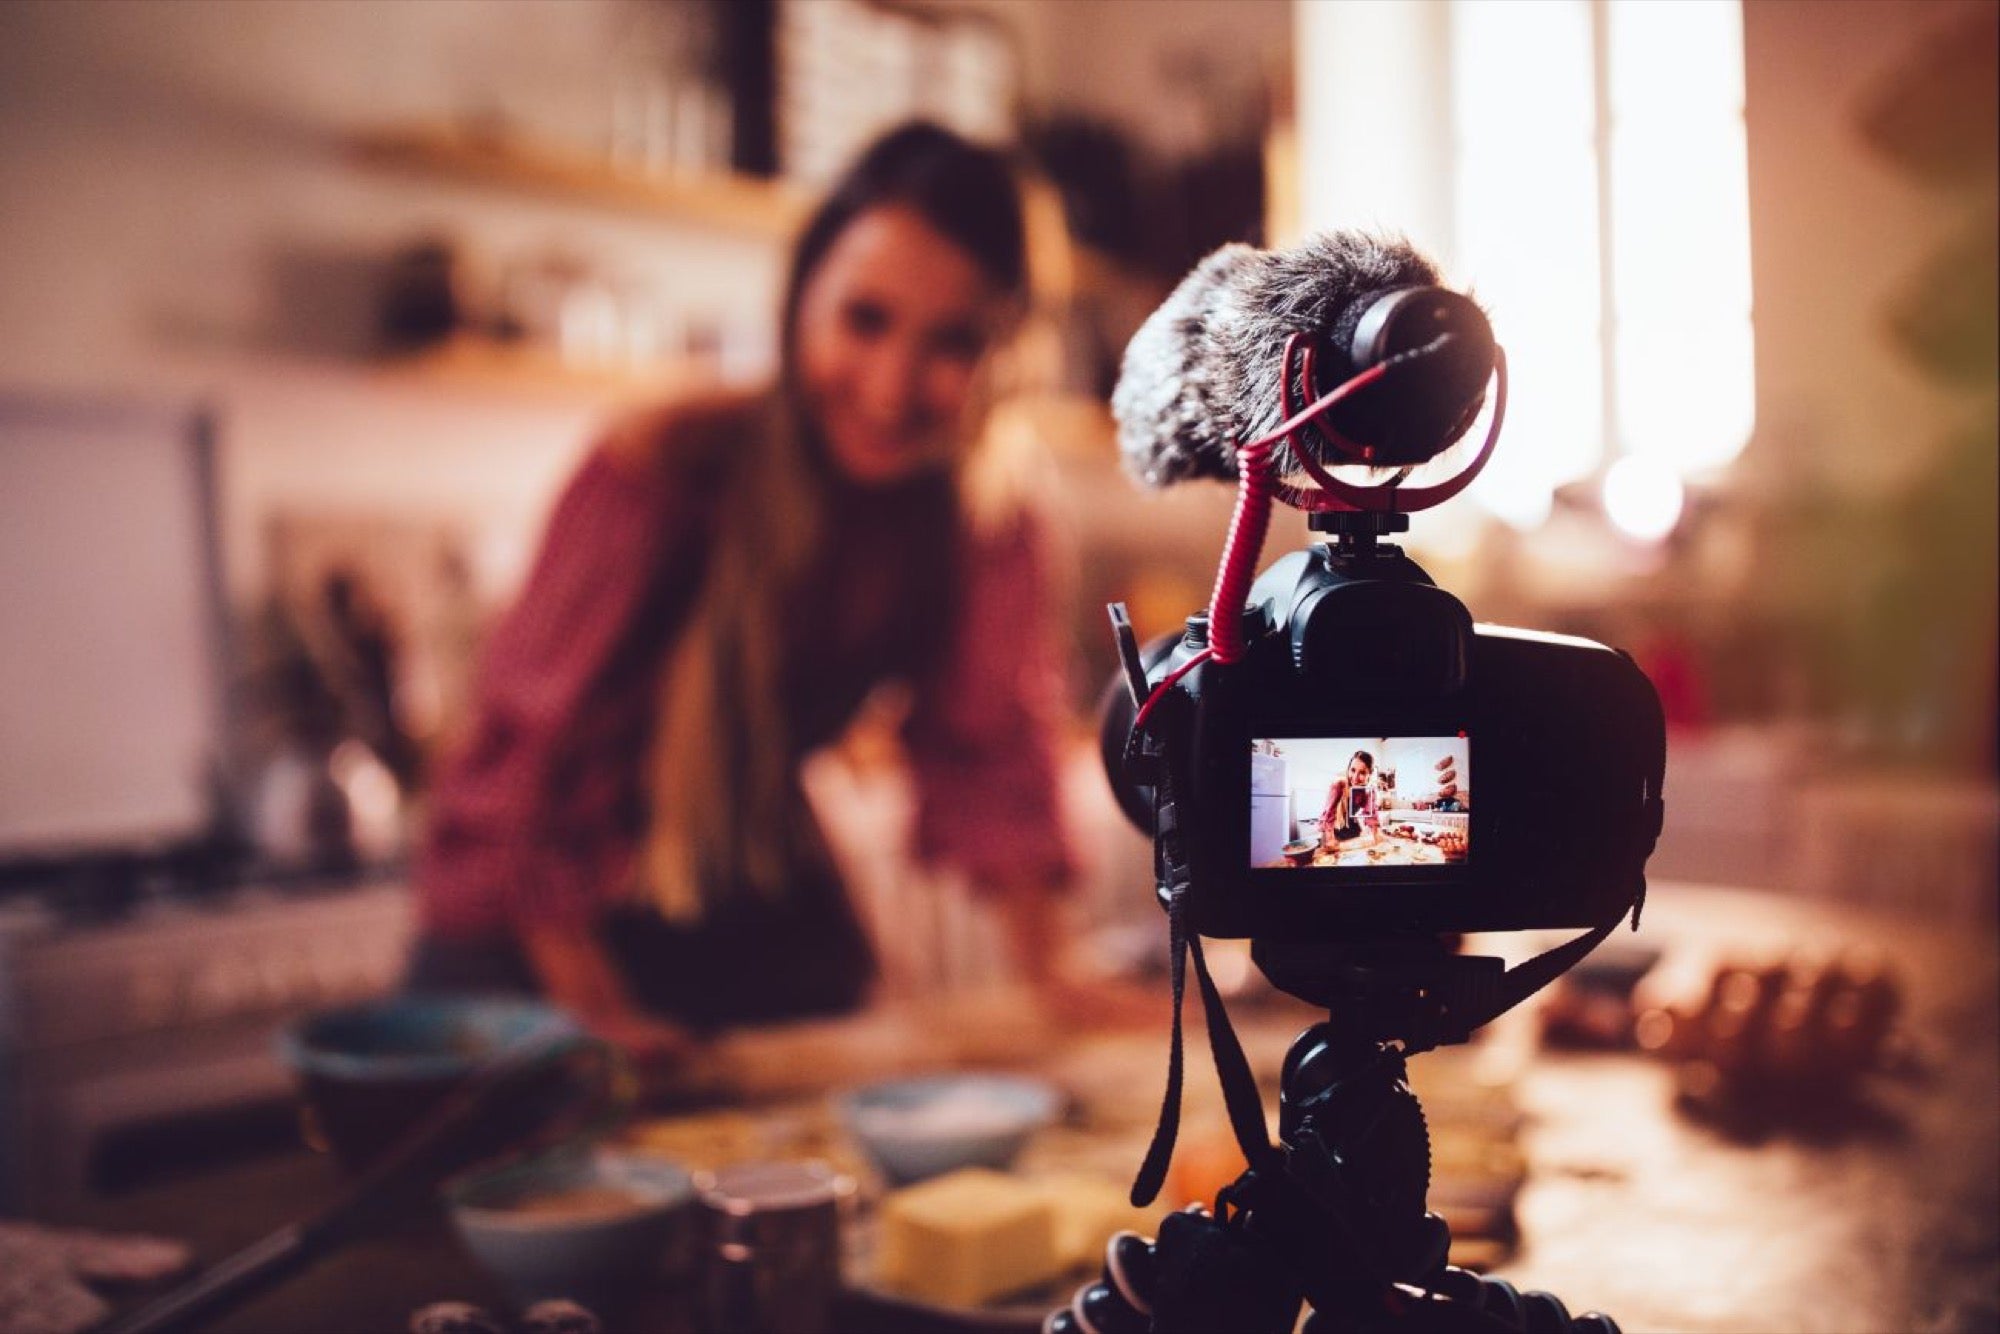 6 More Ways You Can Use YouTube to Reach Your Intended Audience